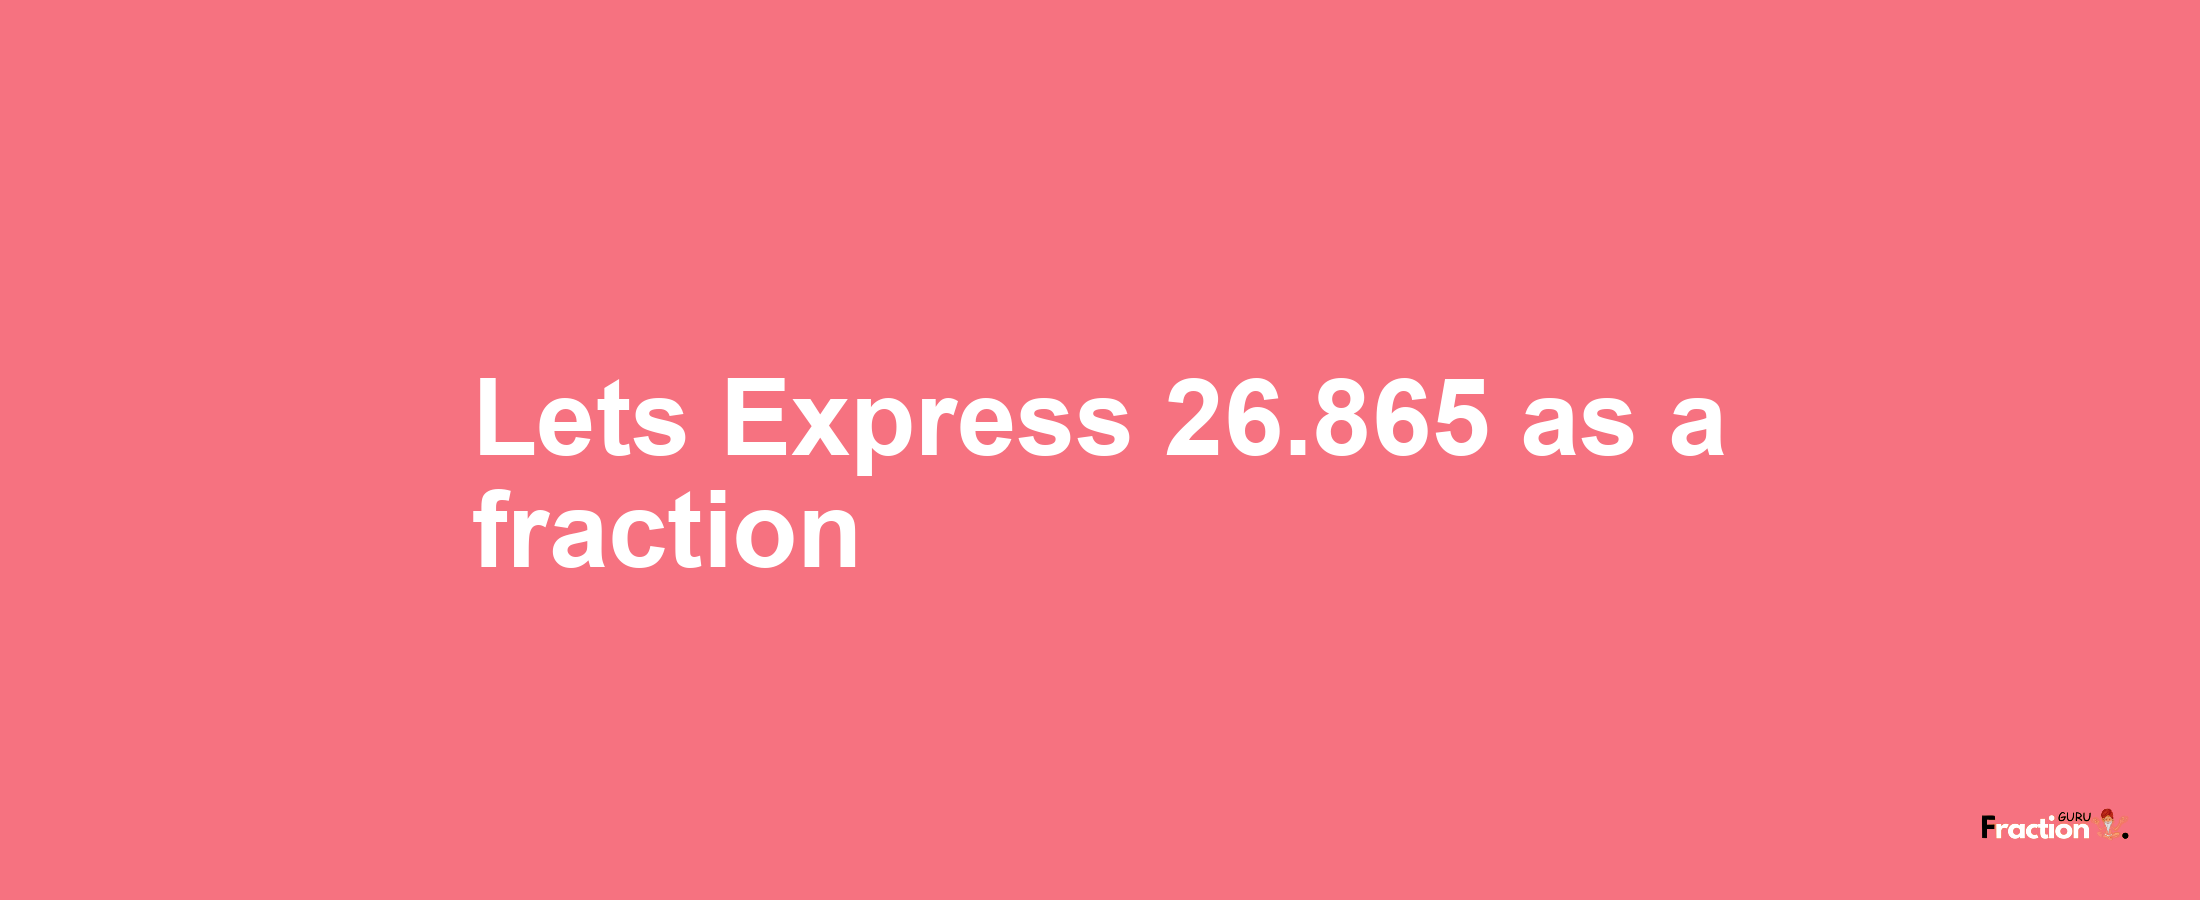 Lets Express 26.865 as afraction